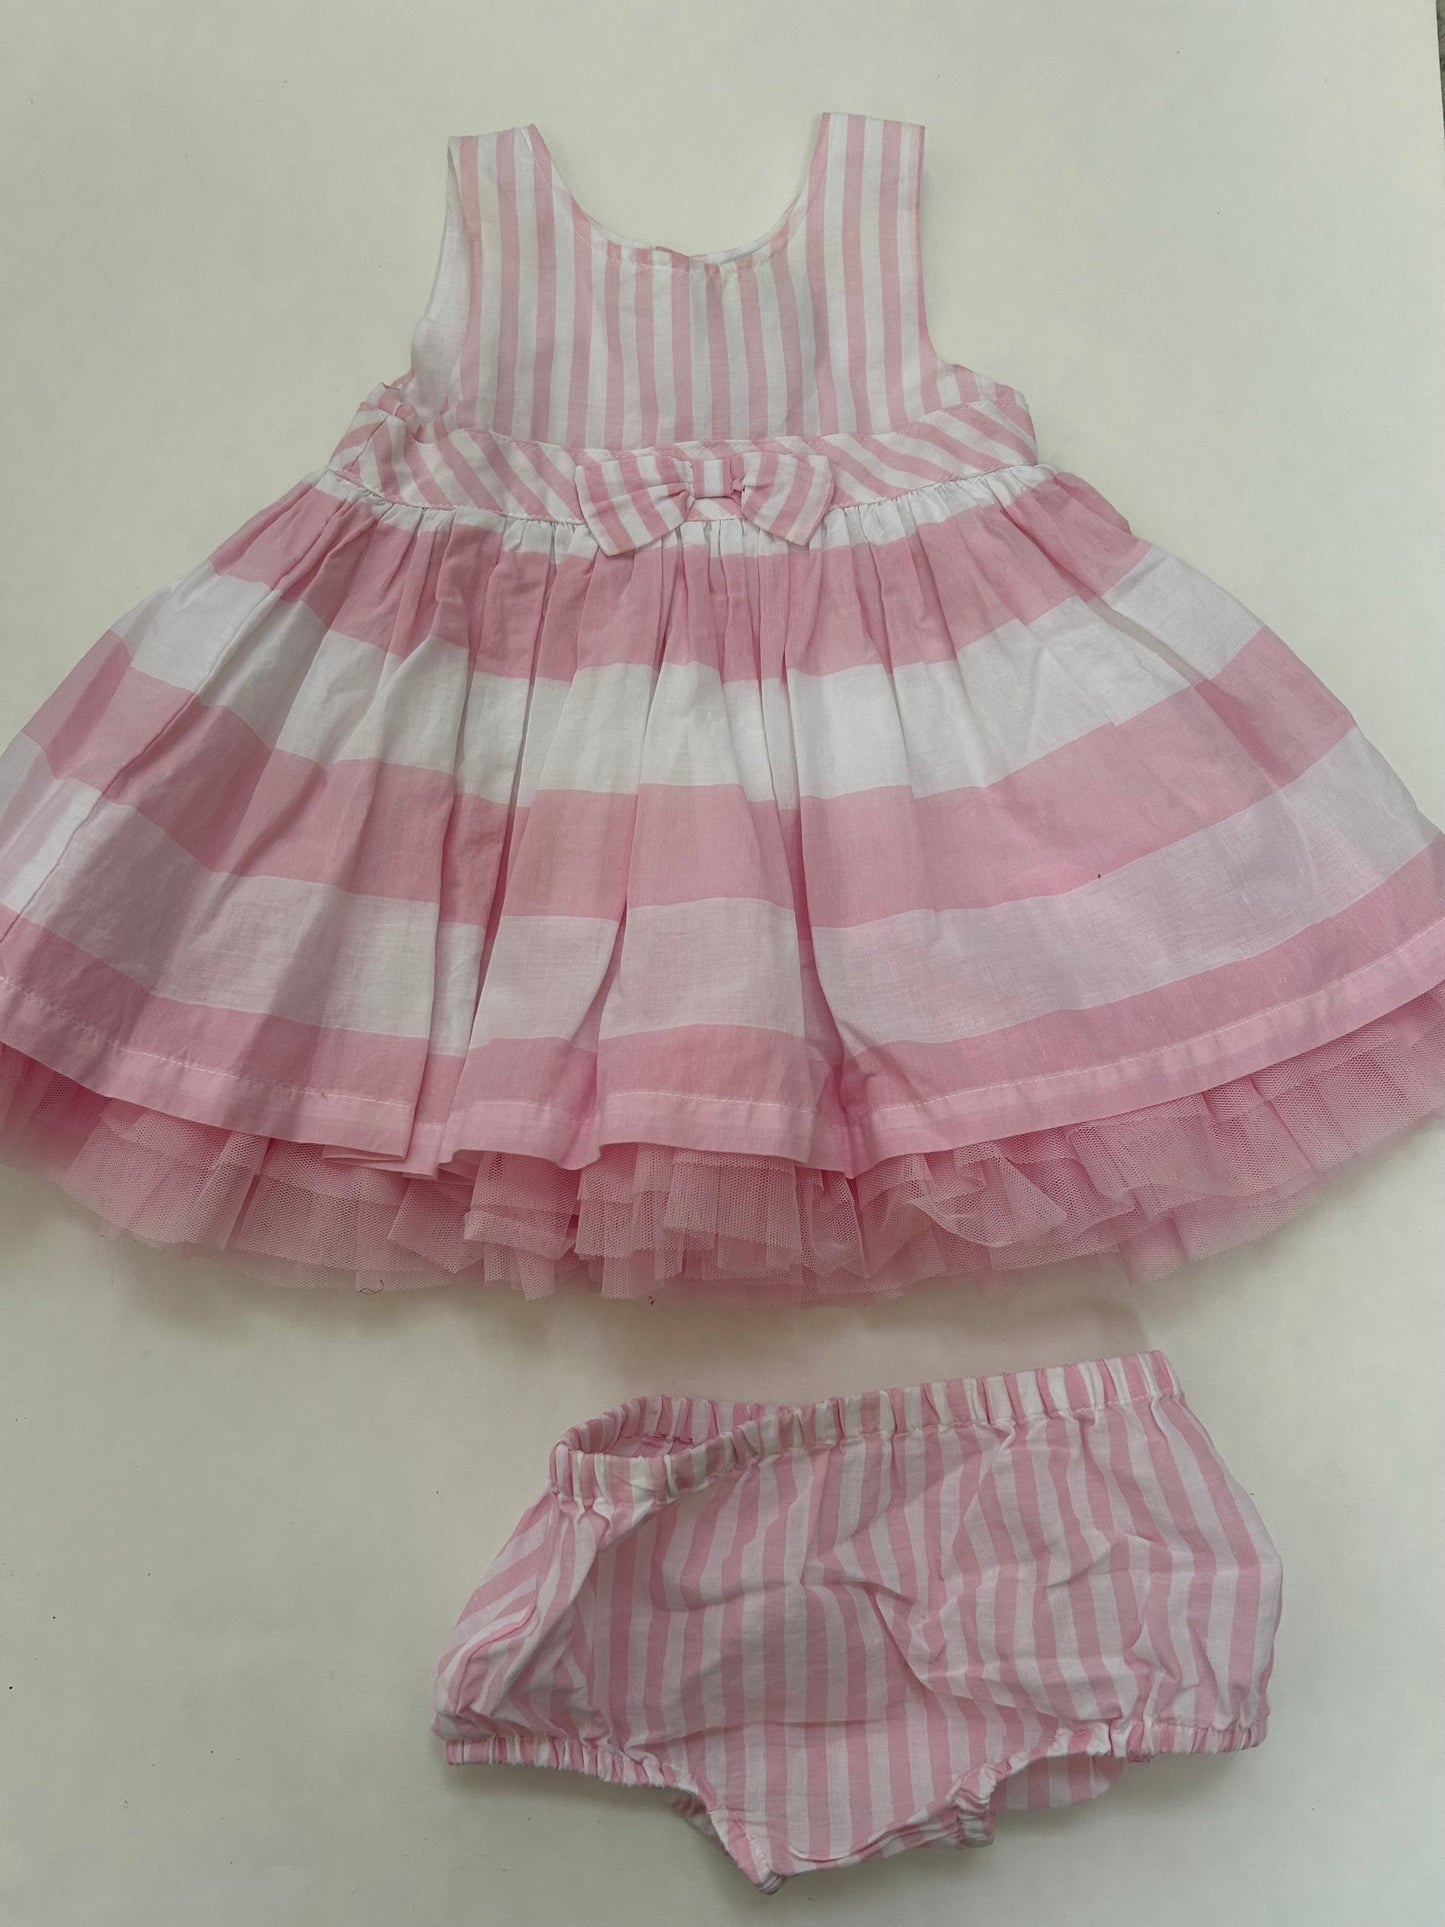 Girls 12 month Little Me Pink/white striped Easter dress